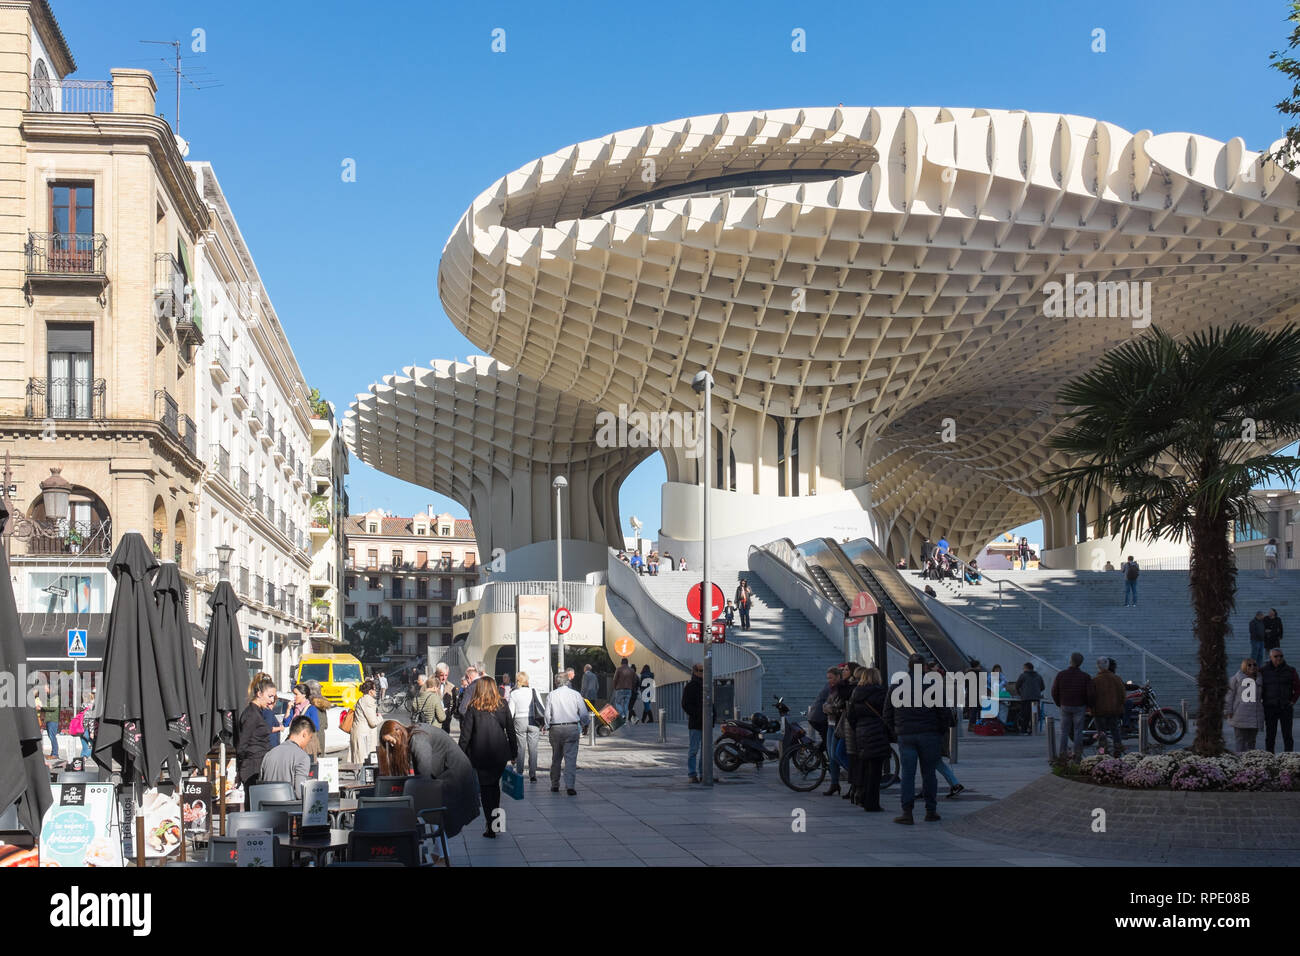 The Metropol Parasol, one of the largest wooden structures ever built in the spanish city of Seville, Andalucia Stock Photo